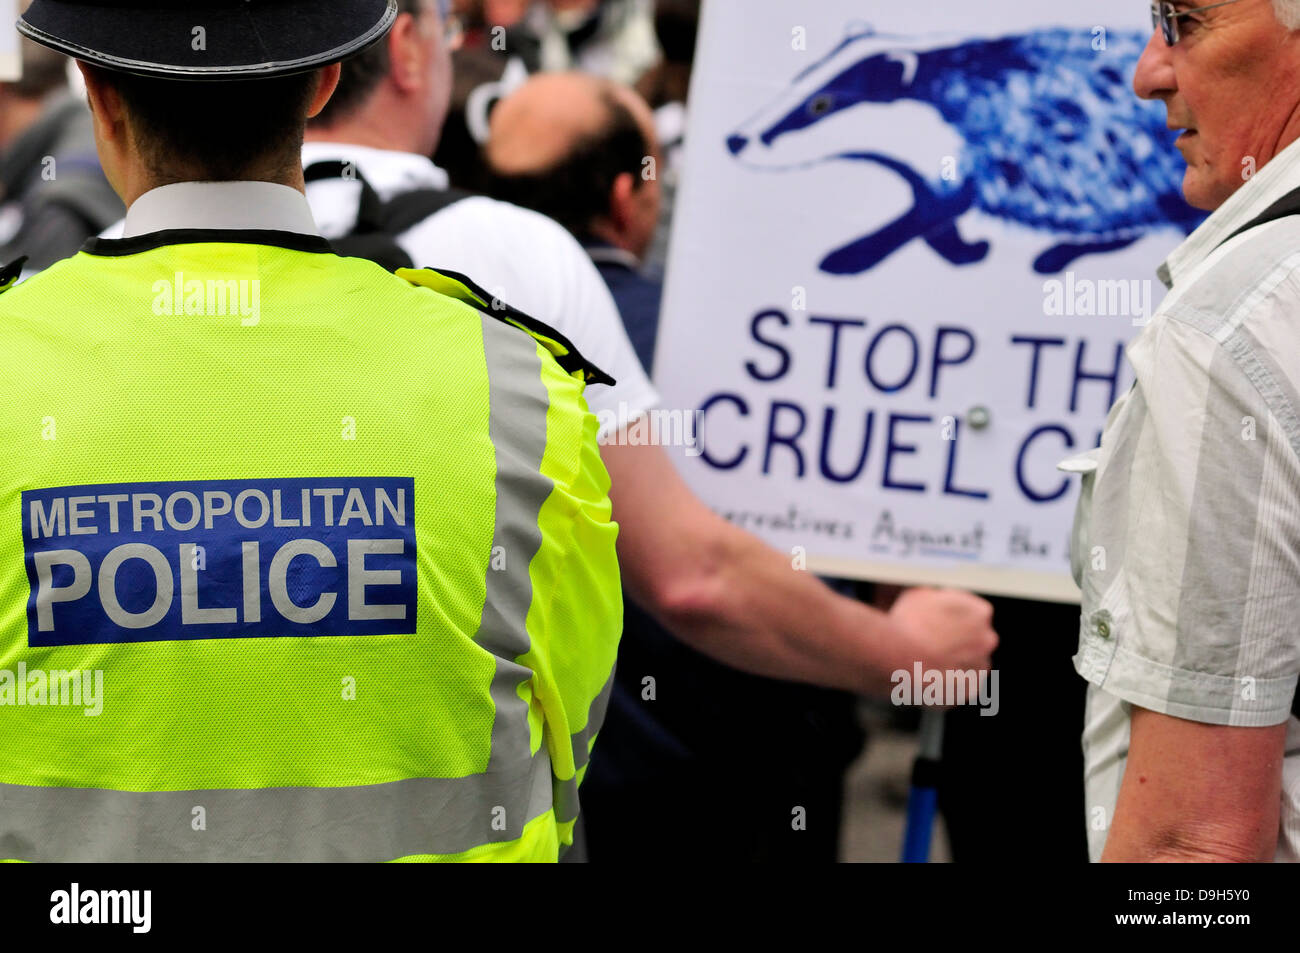 Police officer at the National March Against the Badger Cull, Saturday 1st June 2013, by Tate Britain gallery. Stock Photo